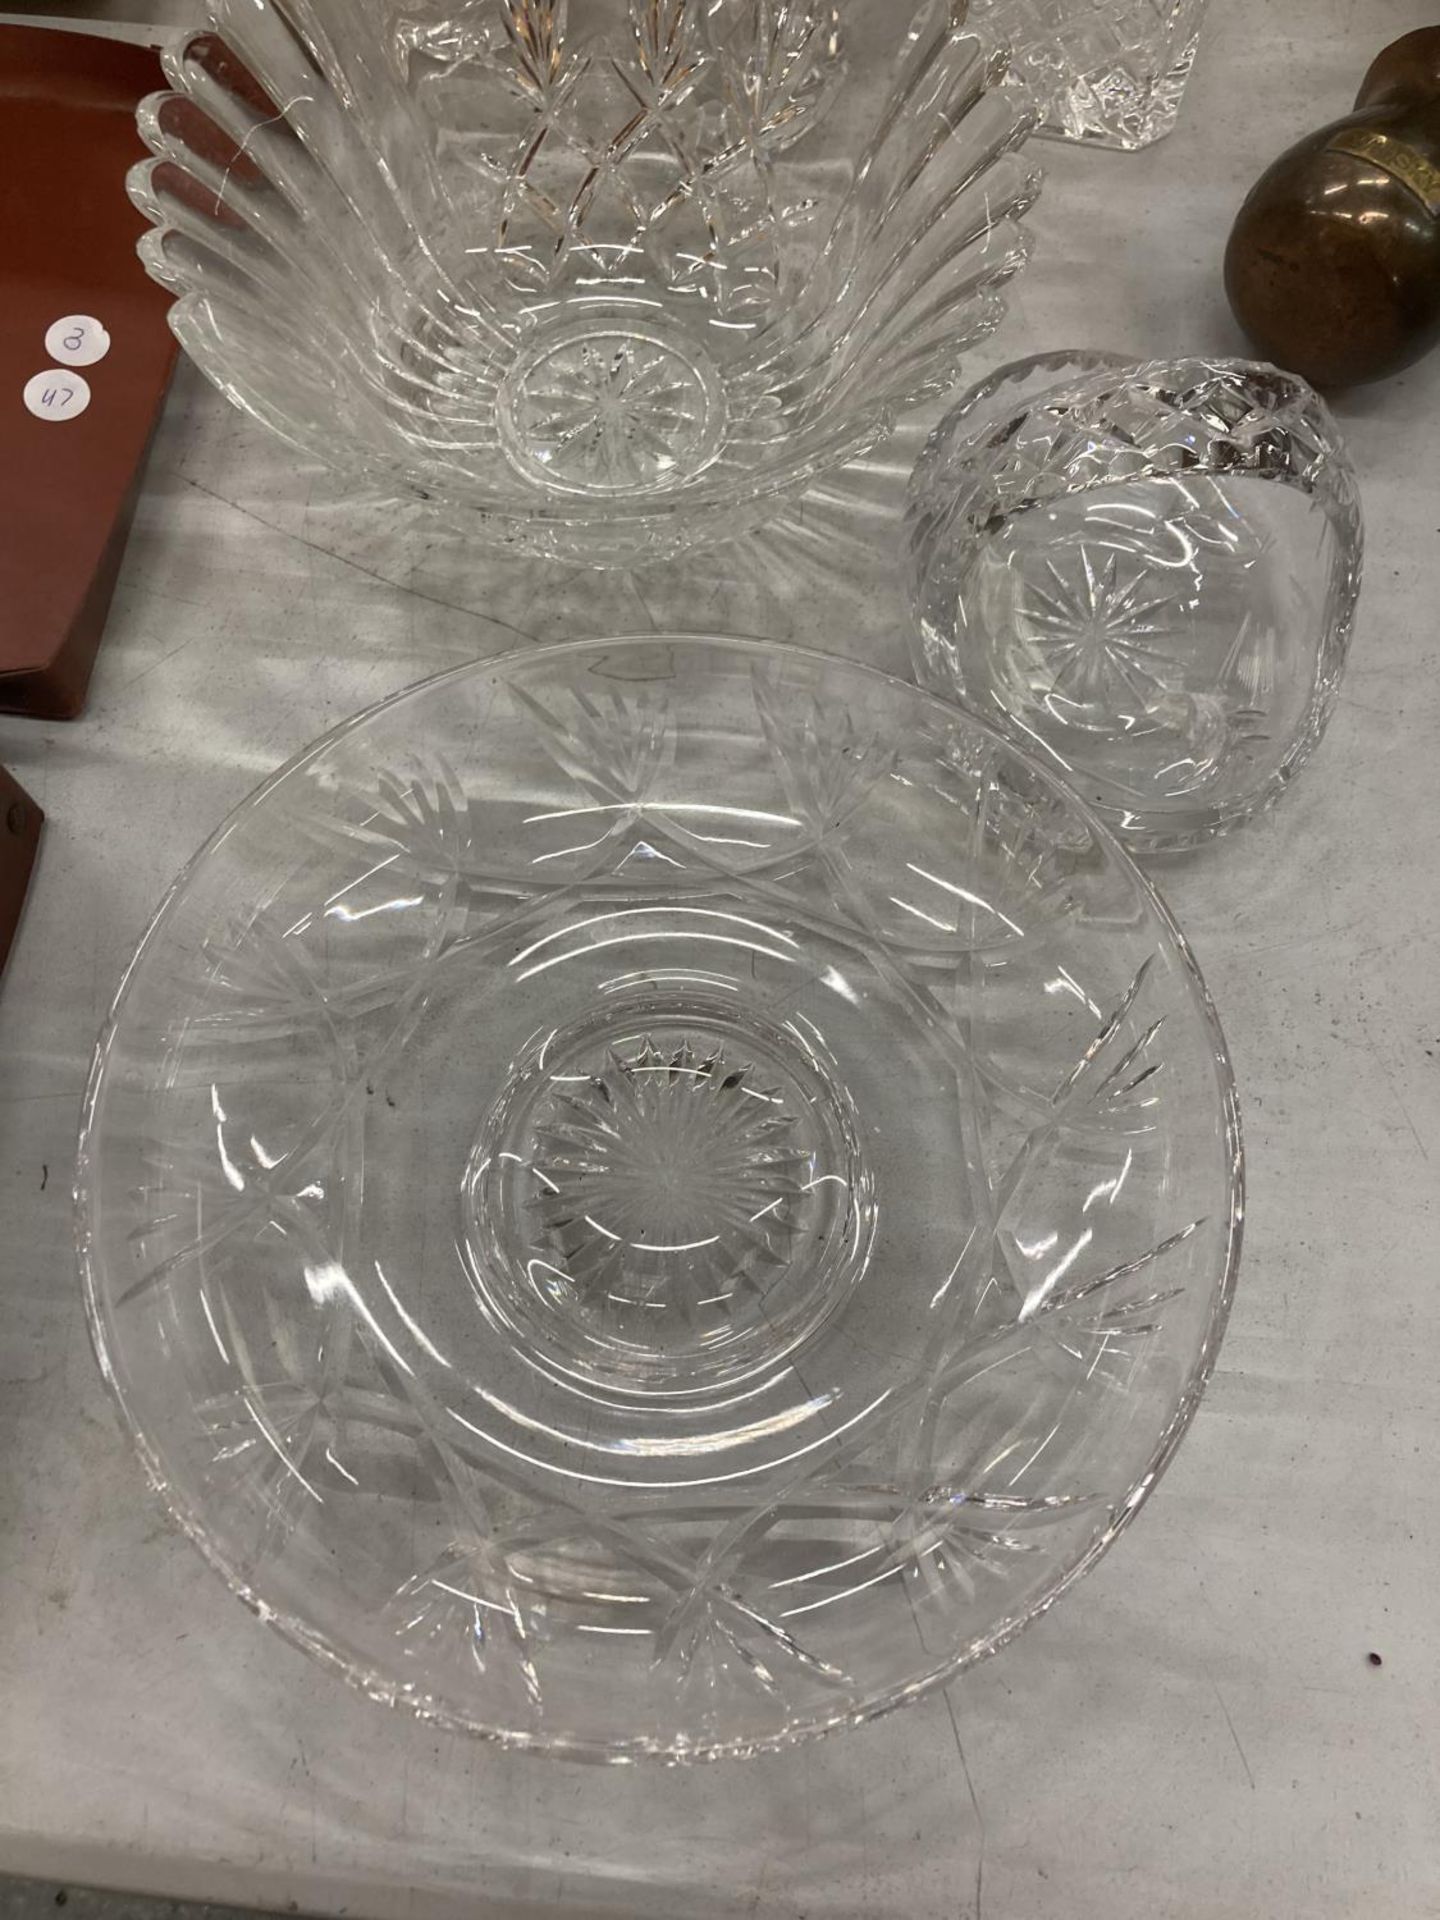 A QUANTITY OF CUT GLASS CRYSTAL GLASS TO INCLUDE VASES, BOWLS, DECANTERS, ETC - Image 3 of 4